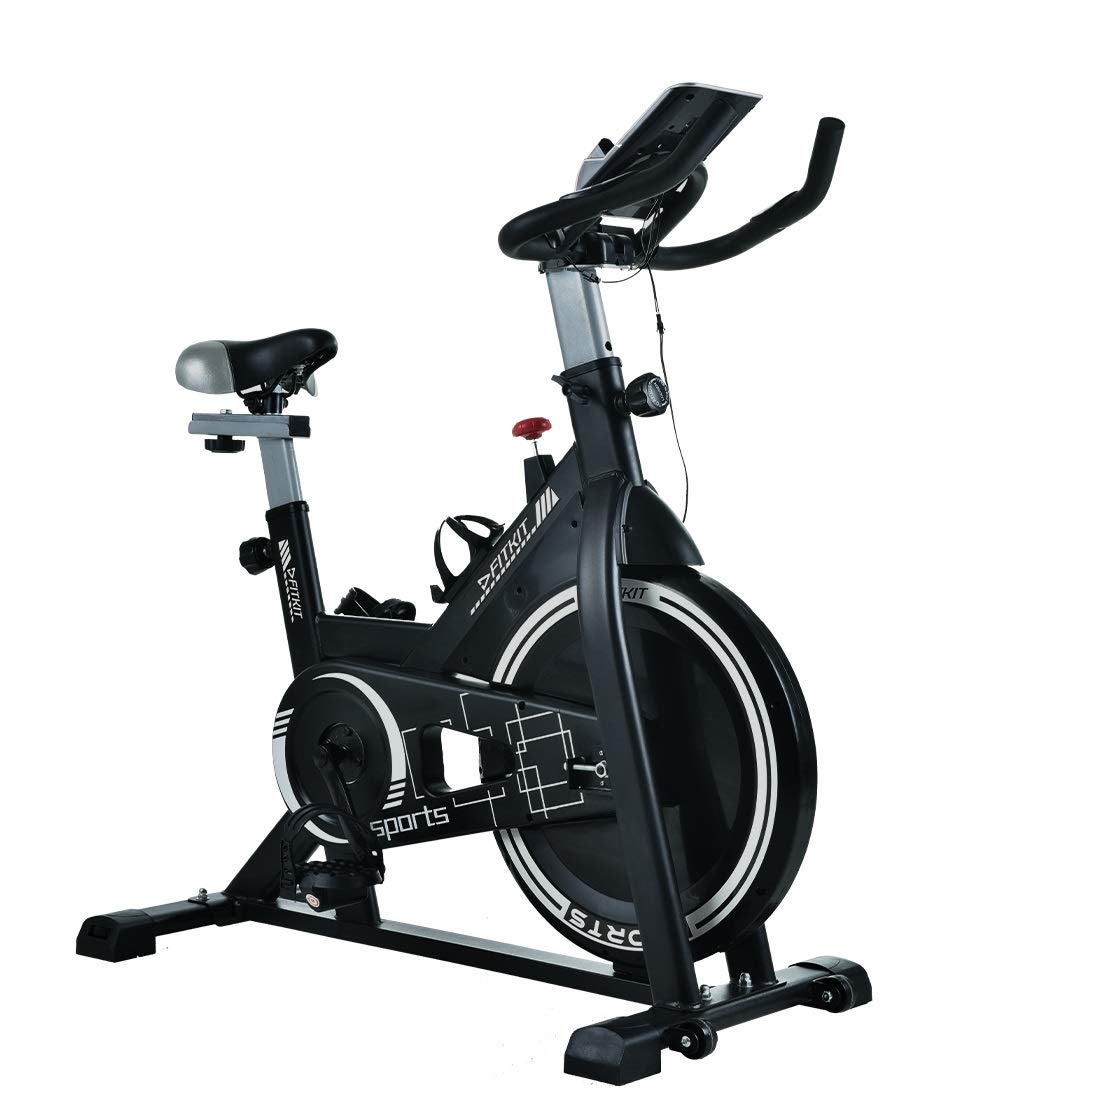 Fitkit FK717 spin bike is one of the best exercise cycles in India